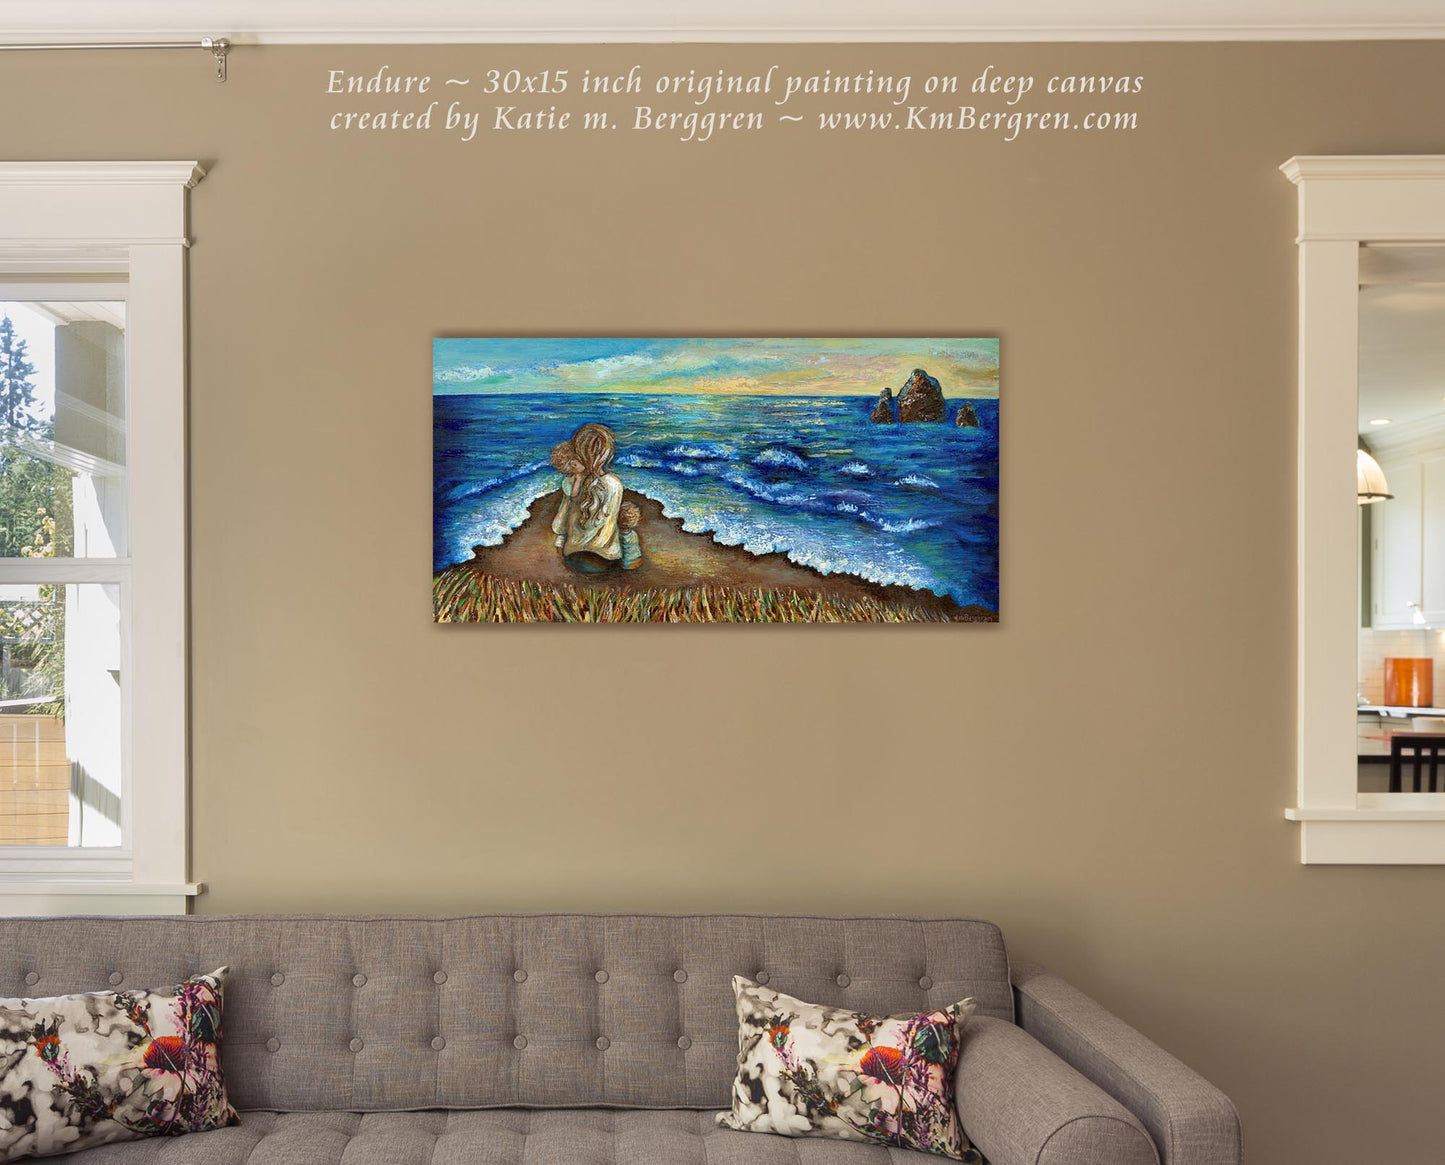 original art of mother and 2 children sitting on beach, painting of mom hugging children by the seashore, cool calm artwork, contentment art, relaxing peaceful painting shown on couch room wall